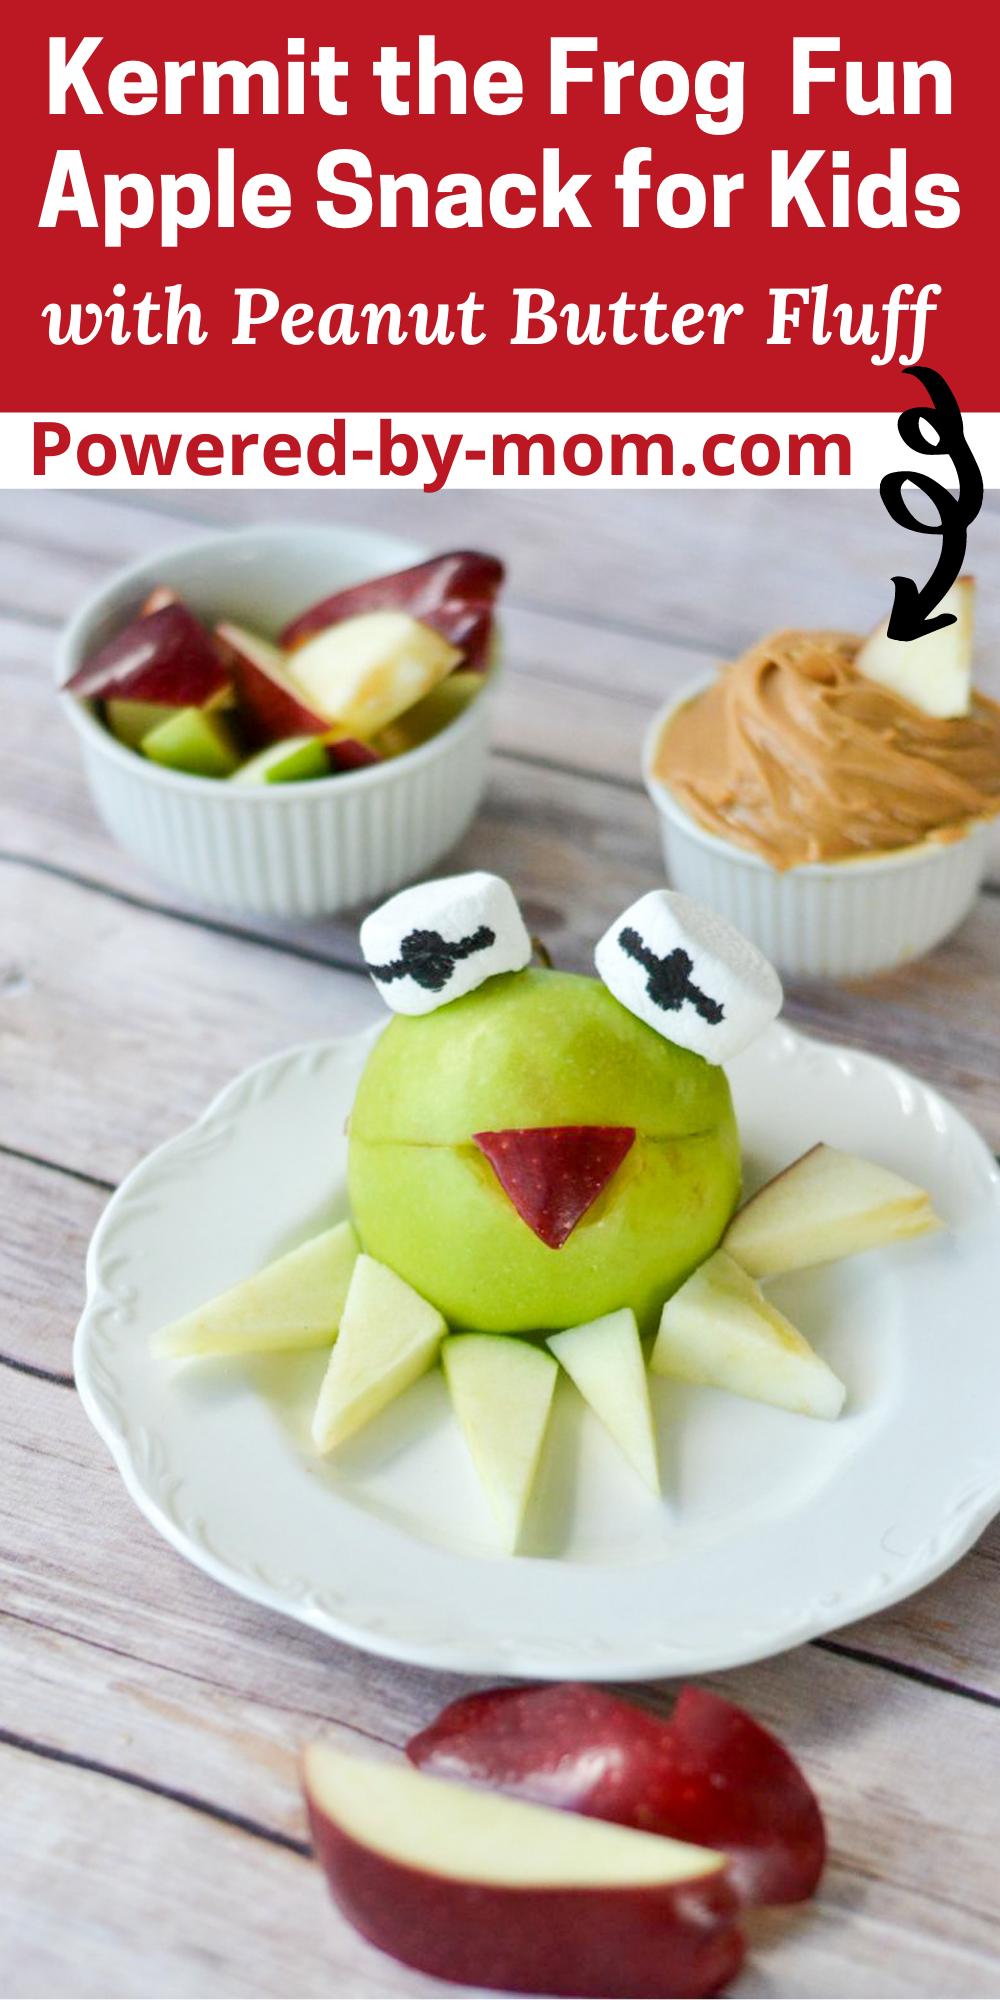 Do you struggle trying to get your kids to eat healthy snacks? Try this fun healthy snack for kids in the shape of the Muppet's Kermit the Frog. It's a fun and tasty treat that's healthy with apples and a peanut butter fluff dip!